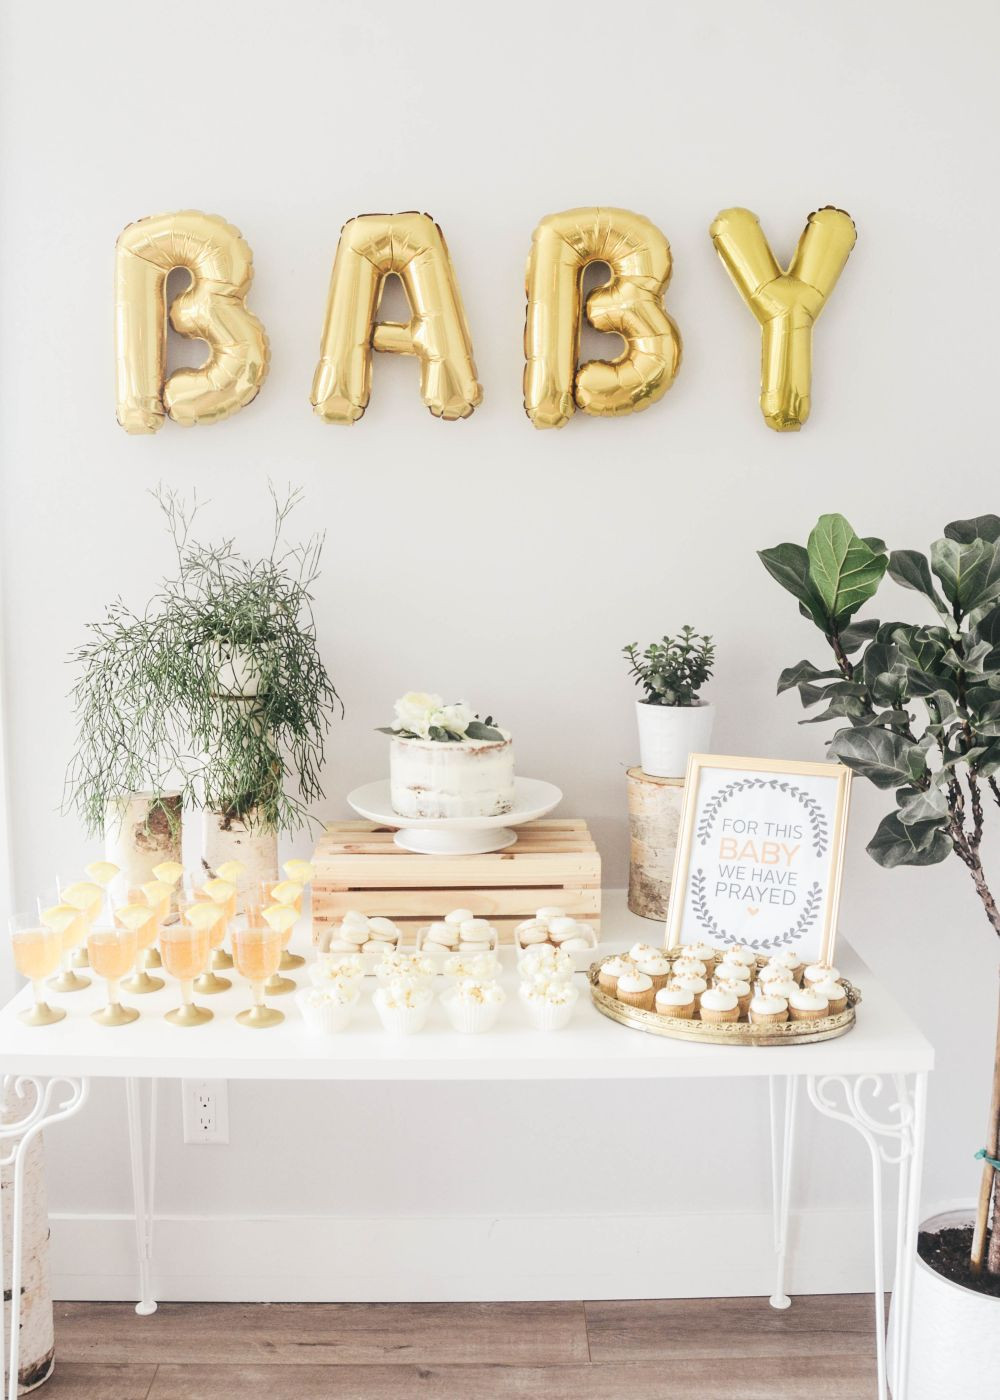 Wall Decor For Baby Shower
 15 Best Baby Shower Décor Ideas for a Memorable Celebration